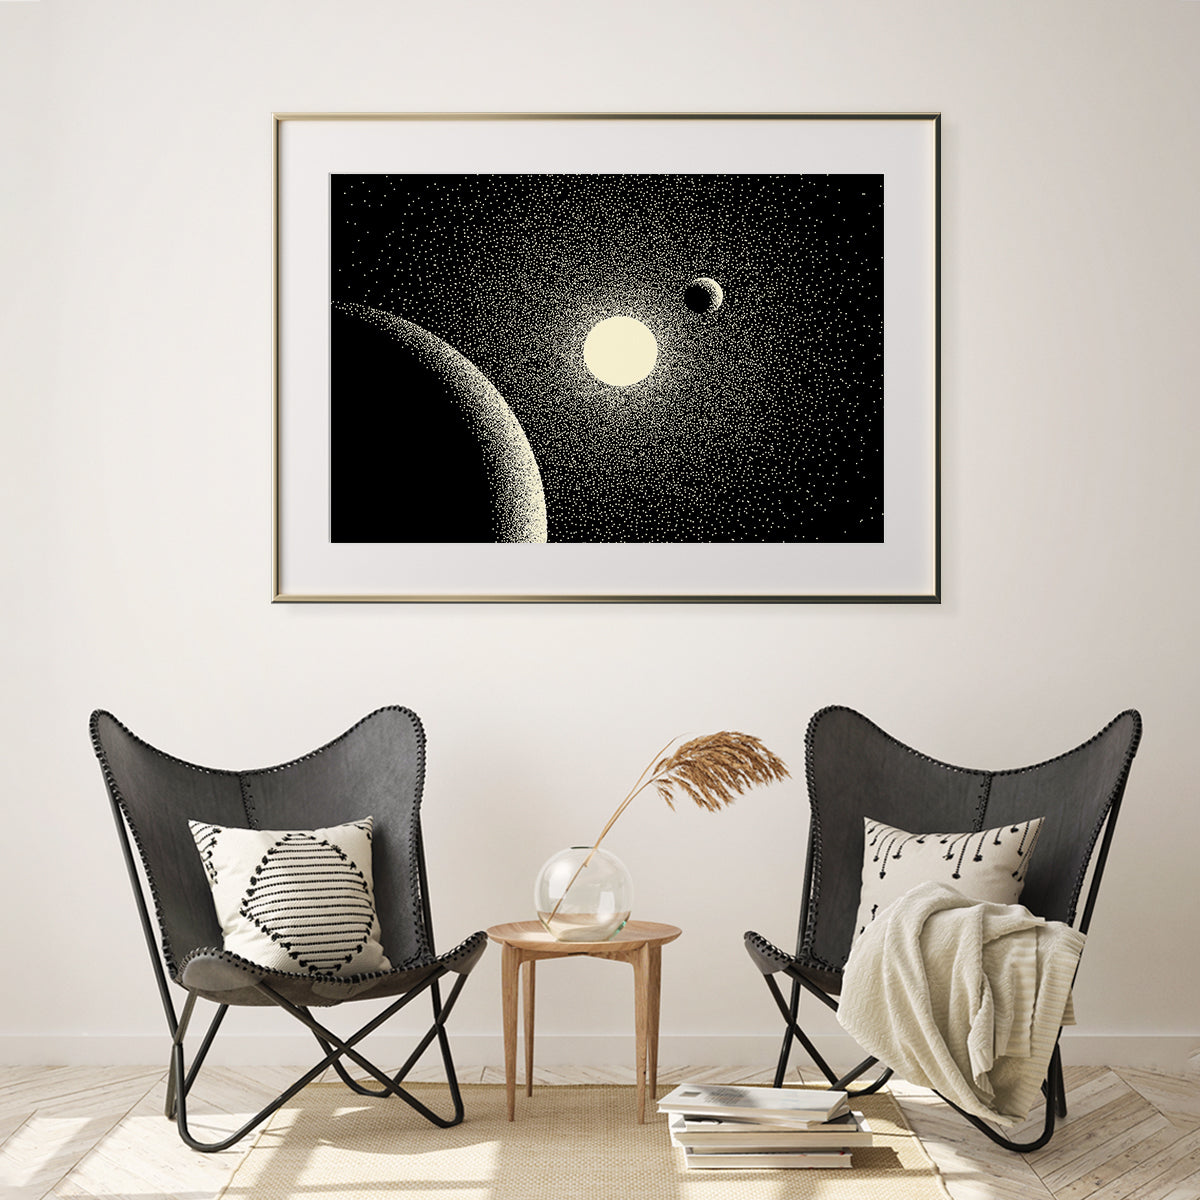 Space Landscape Planet Retro Posters Wall Art-Horizontal Posters NOT FRAMED-CetArt-10″x8″ inches-CetArt